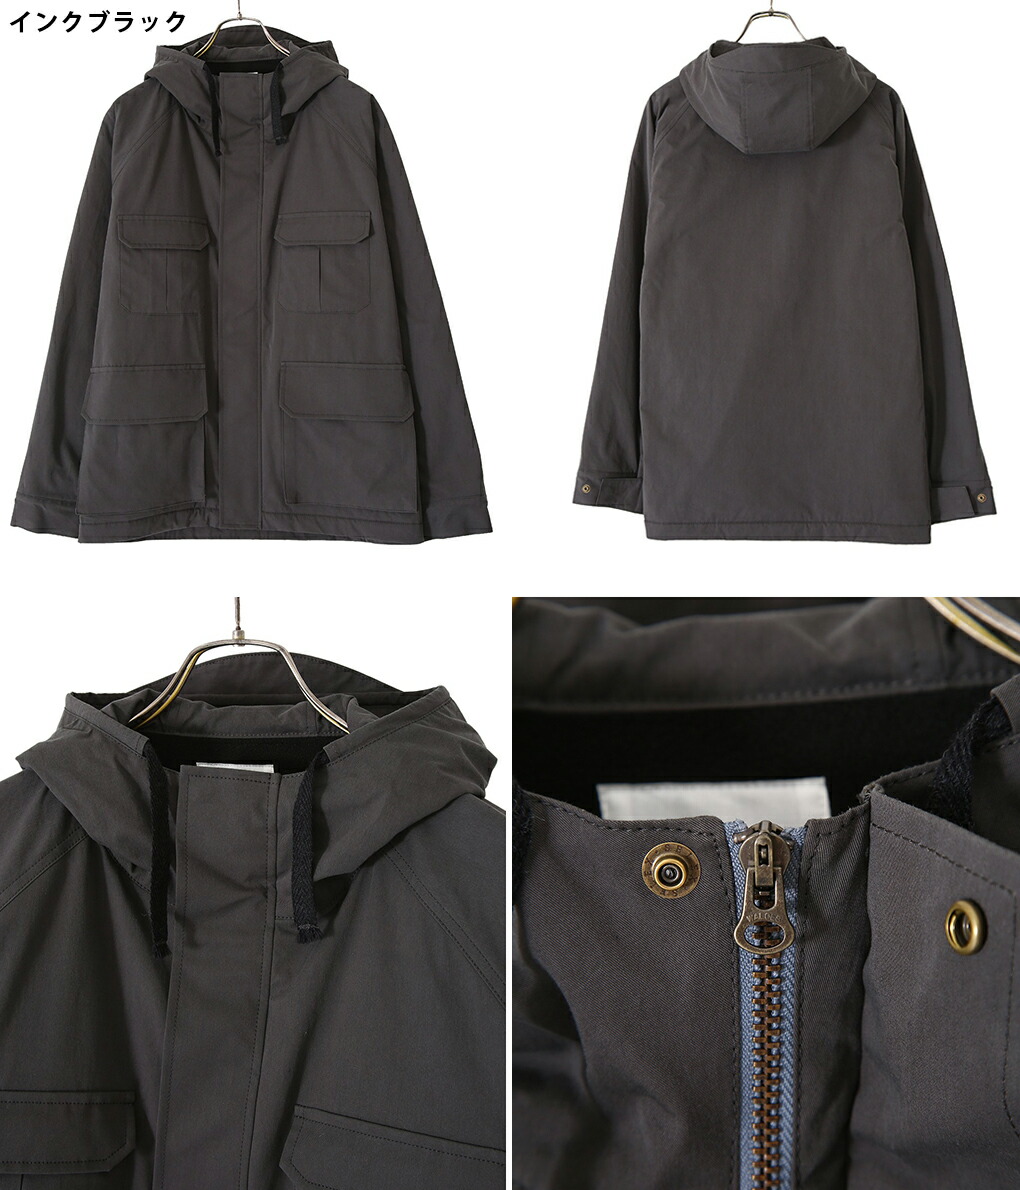 PORT BY ARK / ポートバイアーク ： Mountain Jacket / 全2色 ： PO10